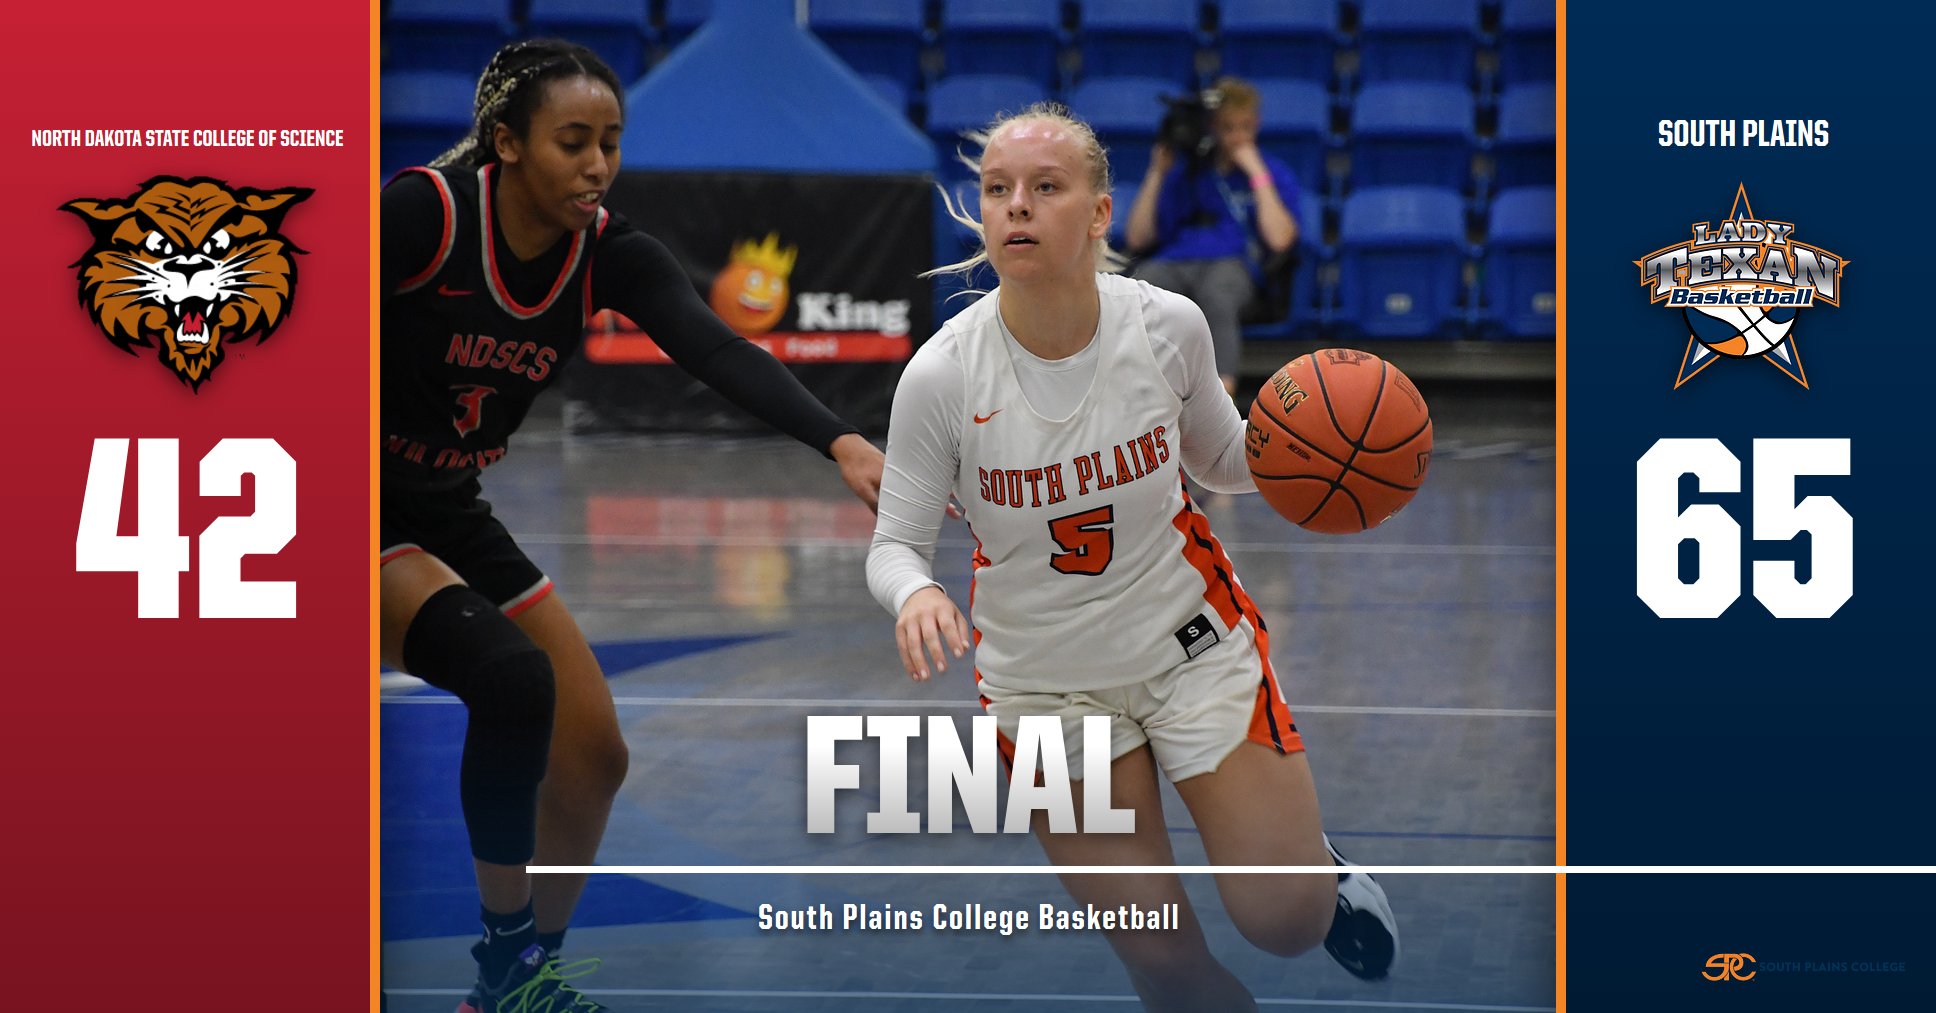 #13 Lady Texans rout #20 North Dakota State College of Science, advance to Sweet 16 of NJCAA Women’s Basketball National Tournament